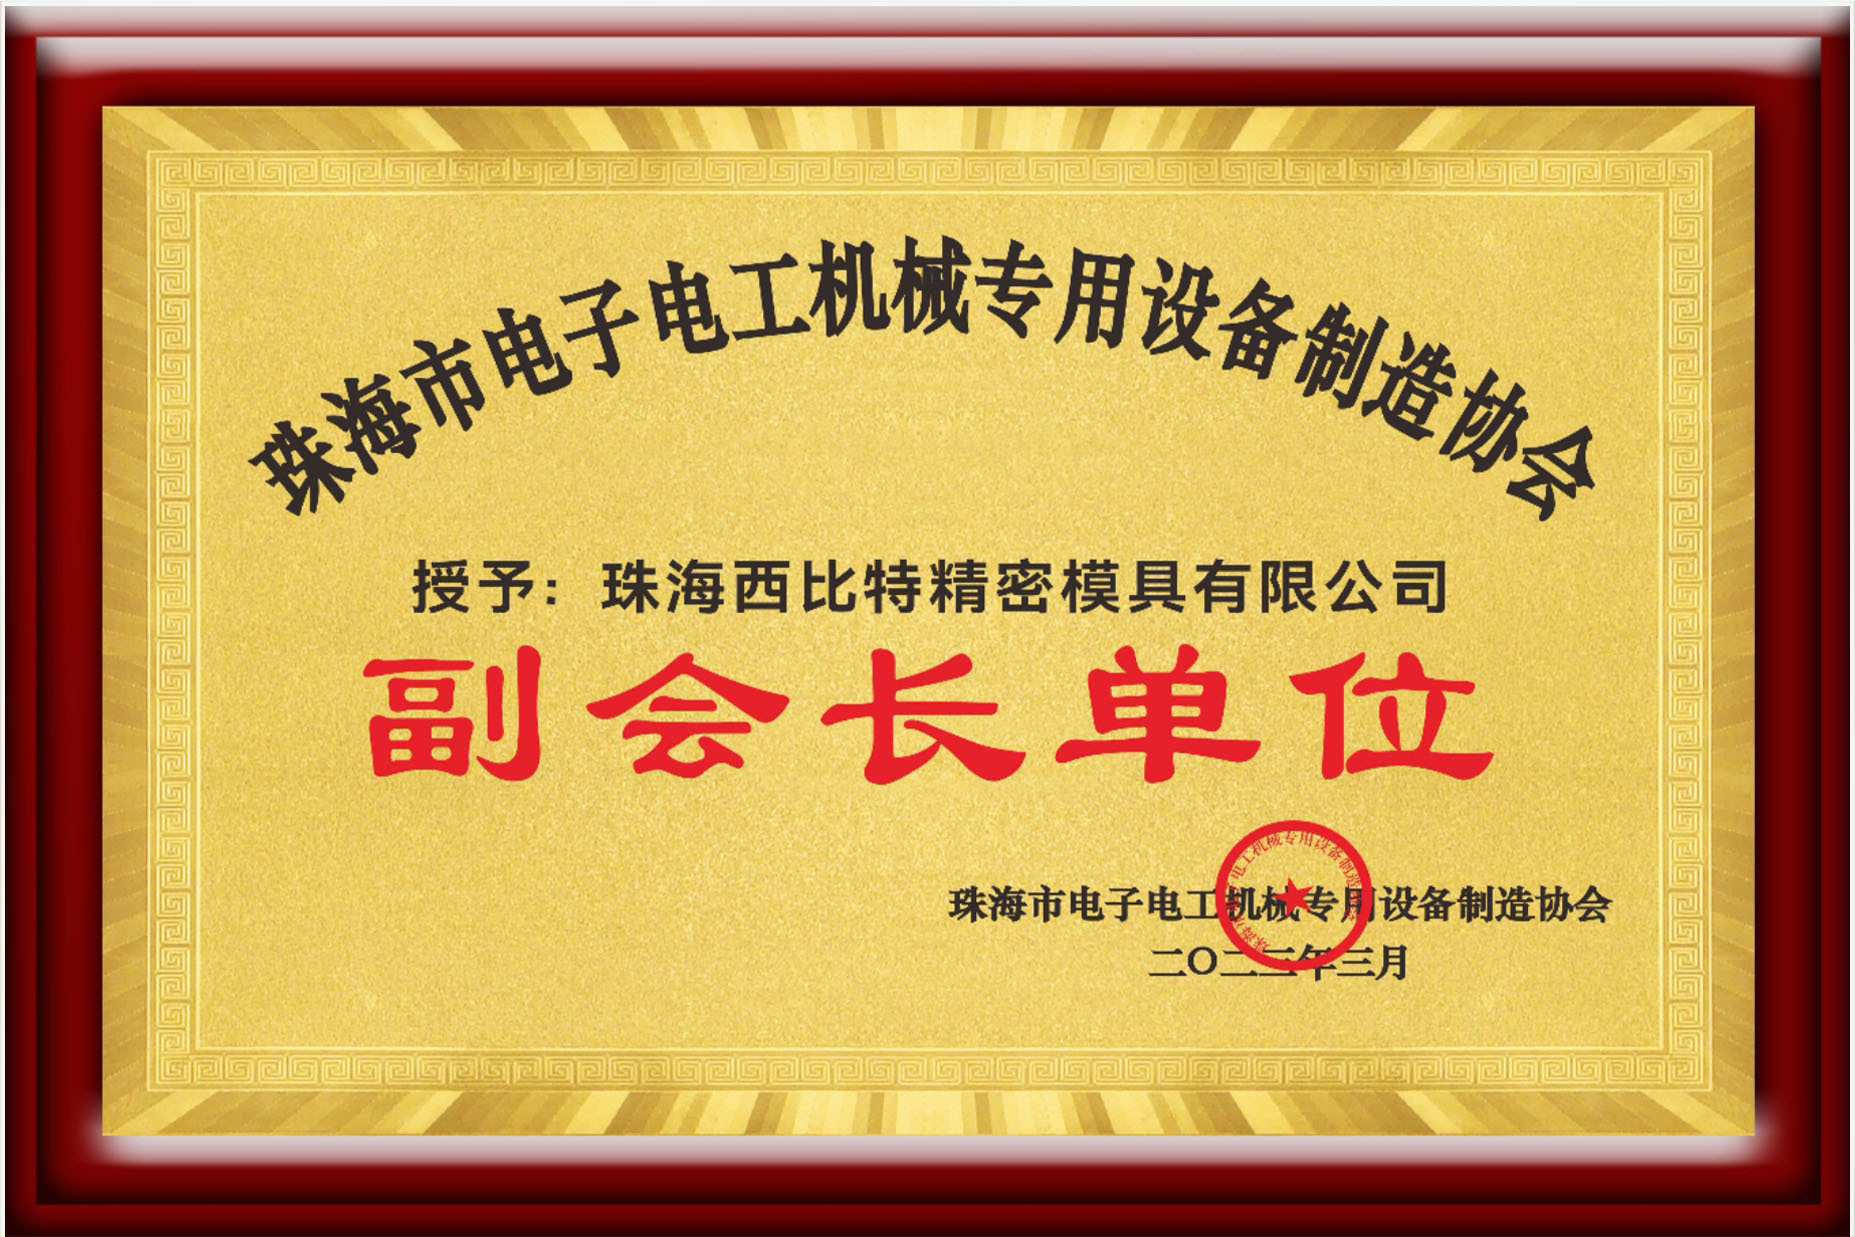 Vice President Unit of Zhuhai Electronic and Electrical Machinery Special Equipment Manufacturing Association